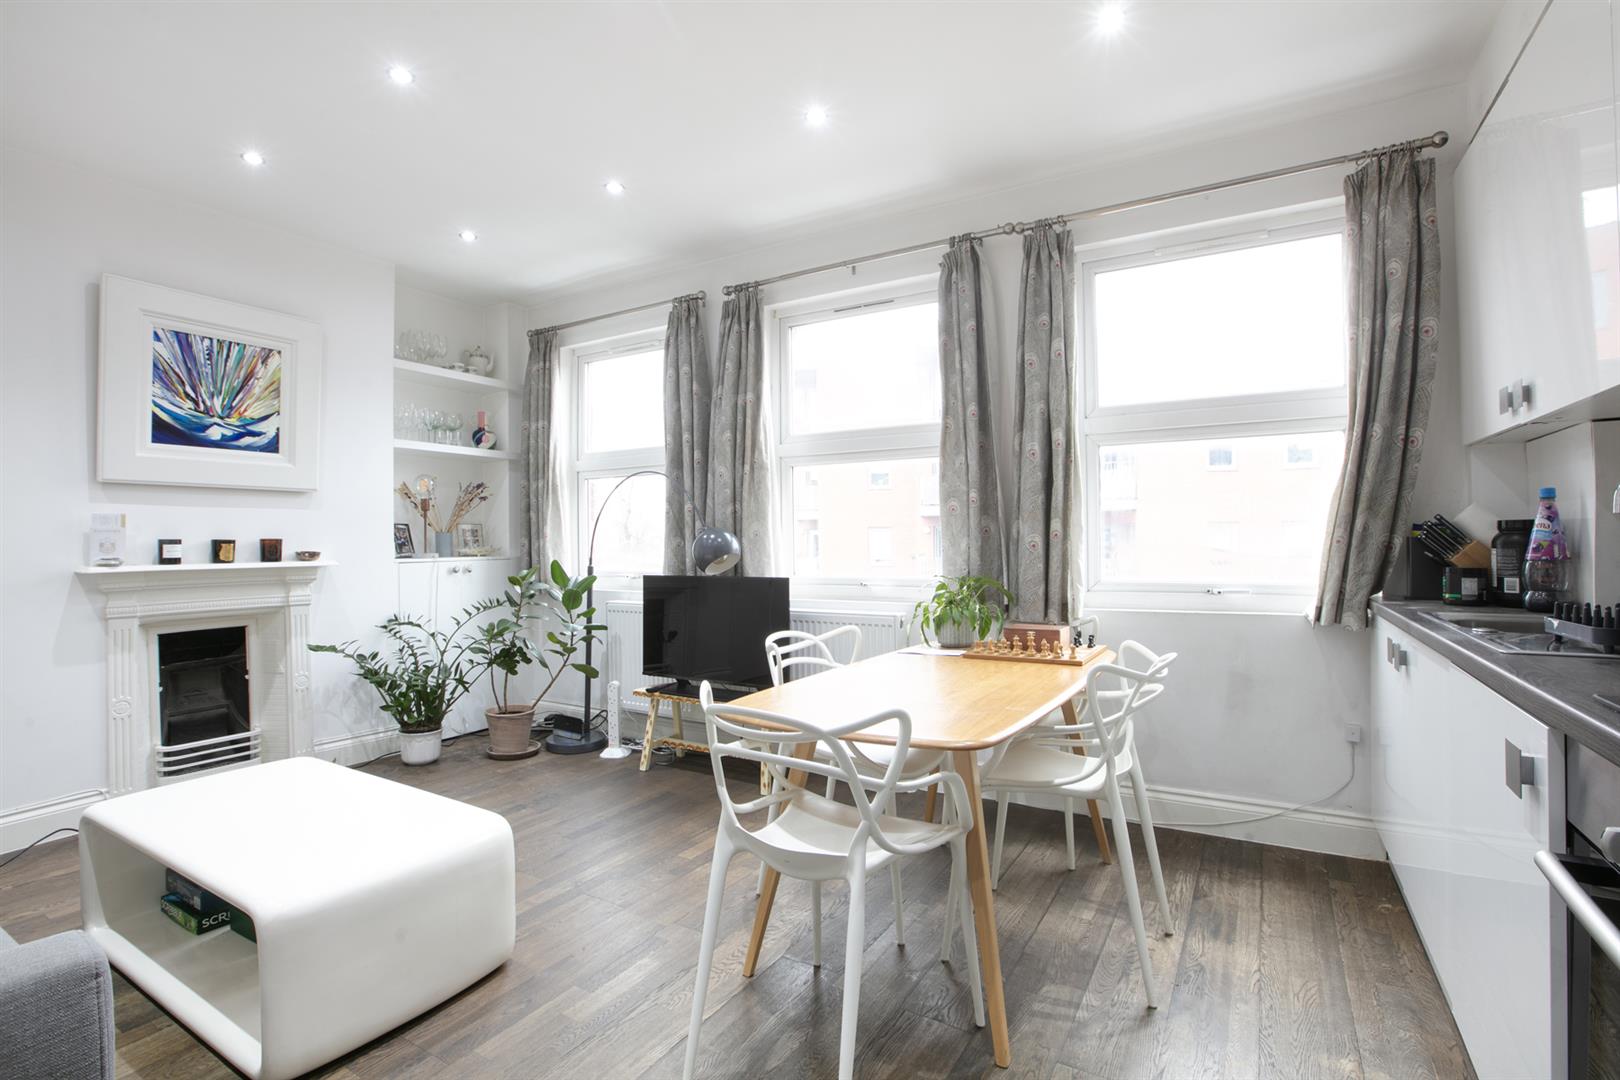 Flat - Conversion For Sale in Coldharbour Lane, Camberwell, SE5 1178 view1